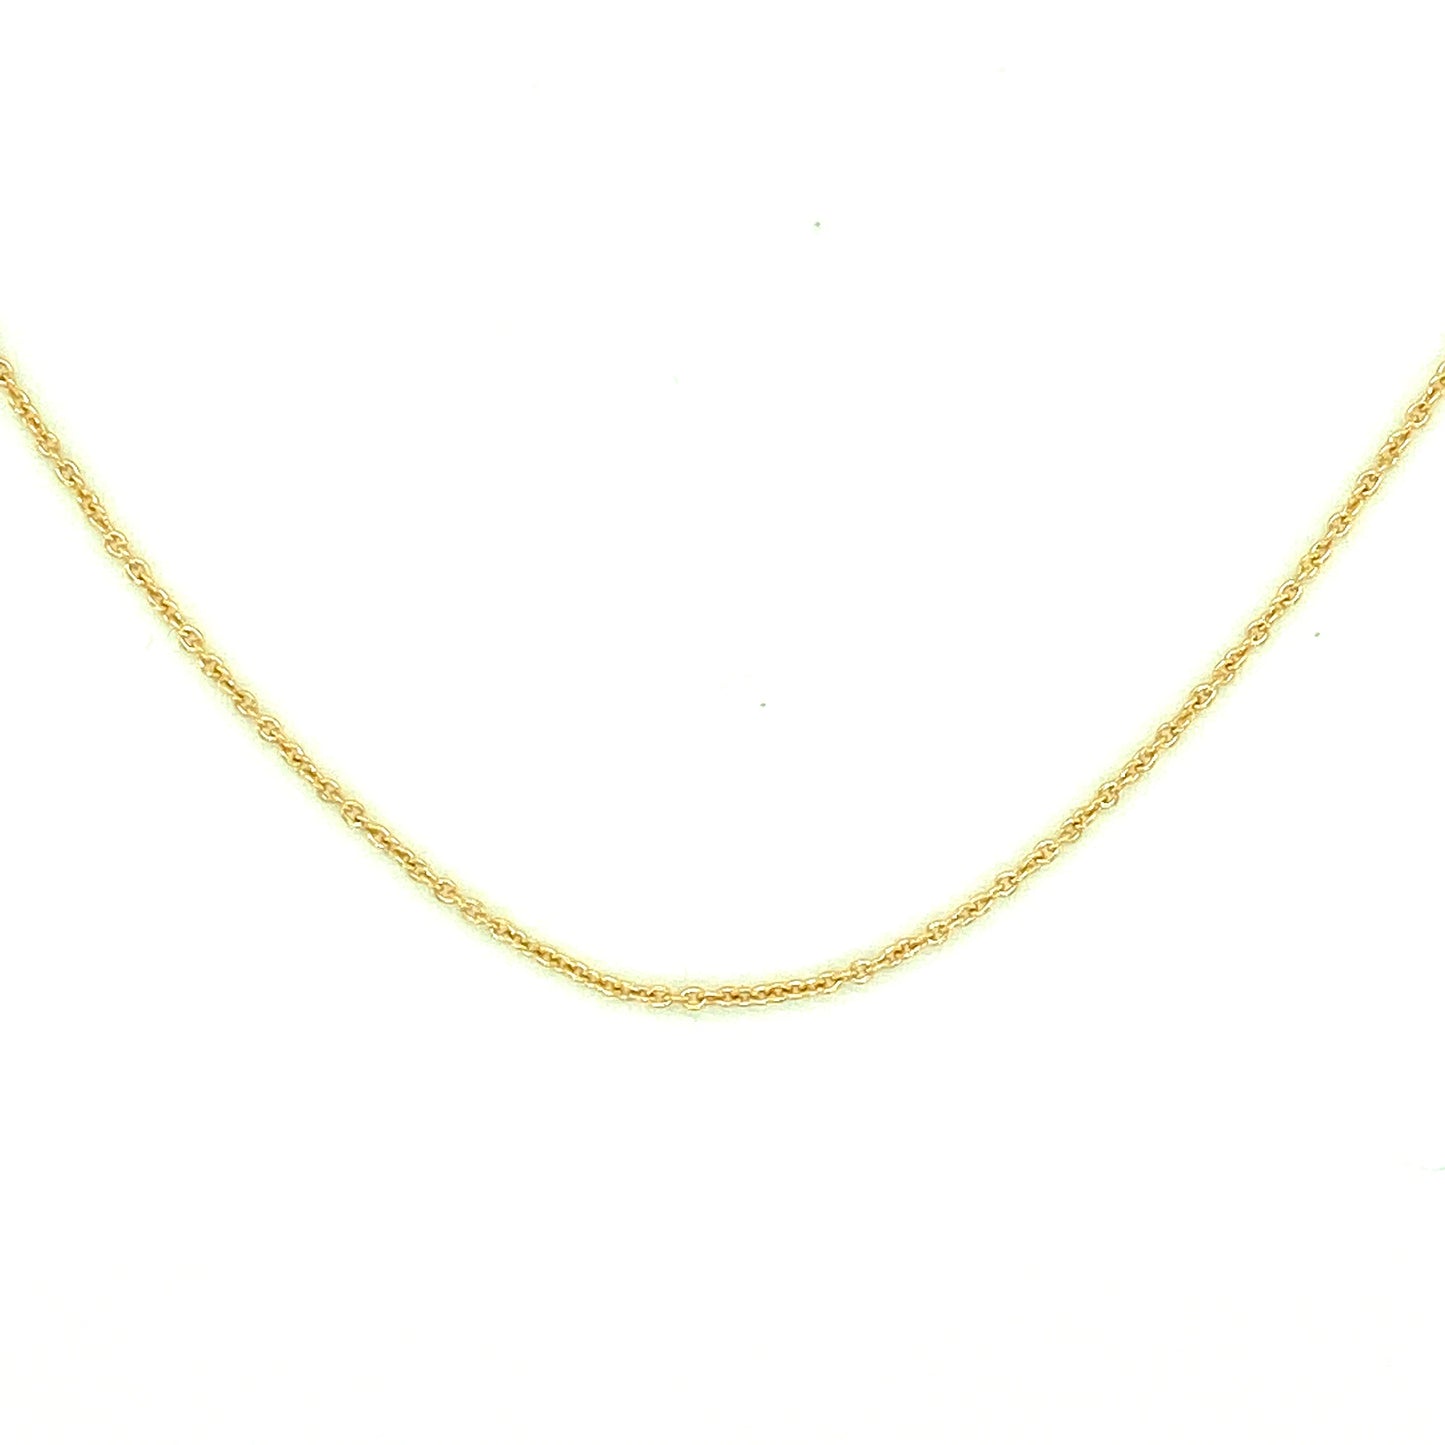 FUSE by Roset - Anastasia Adjustable Gold Chain